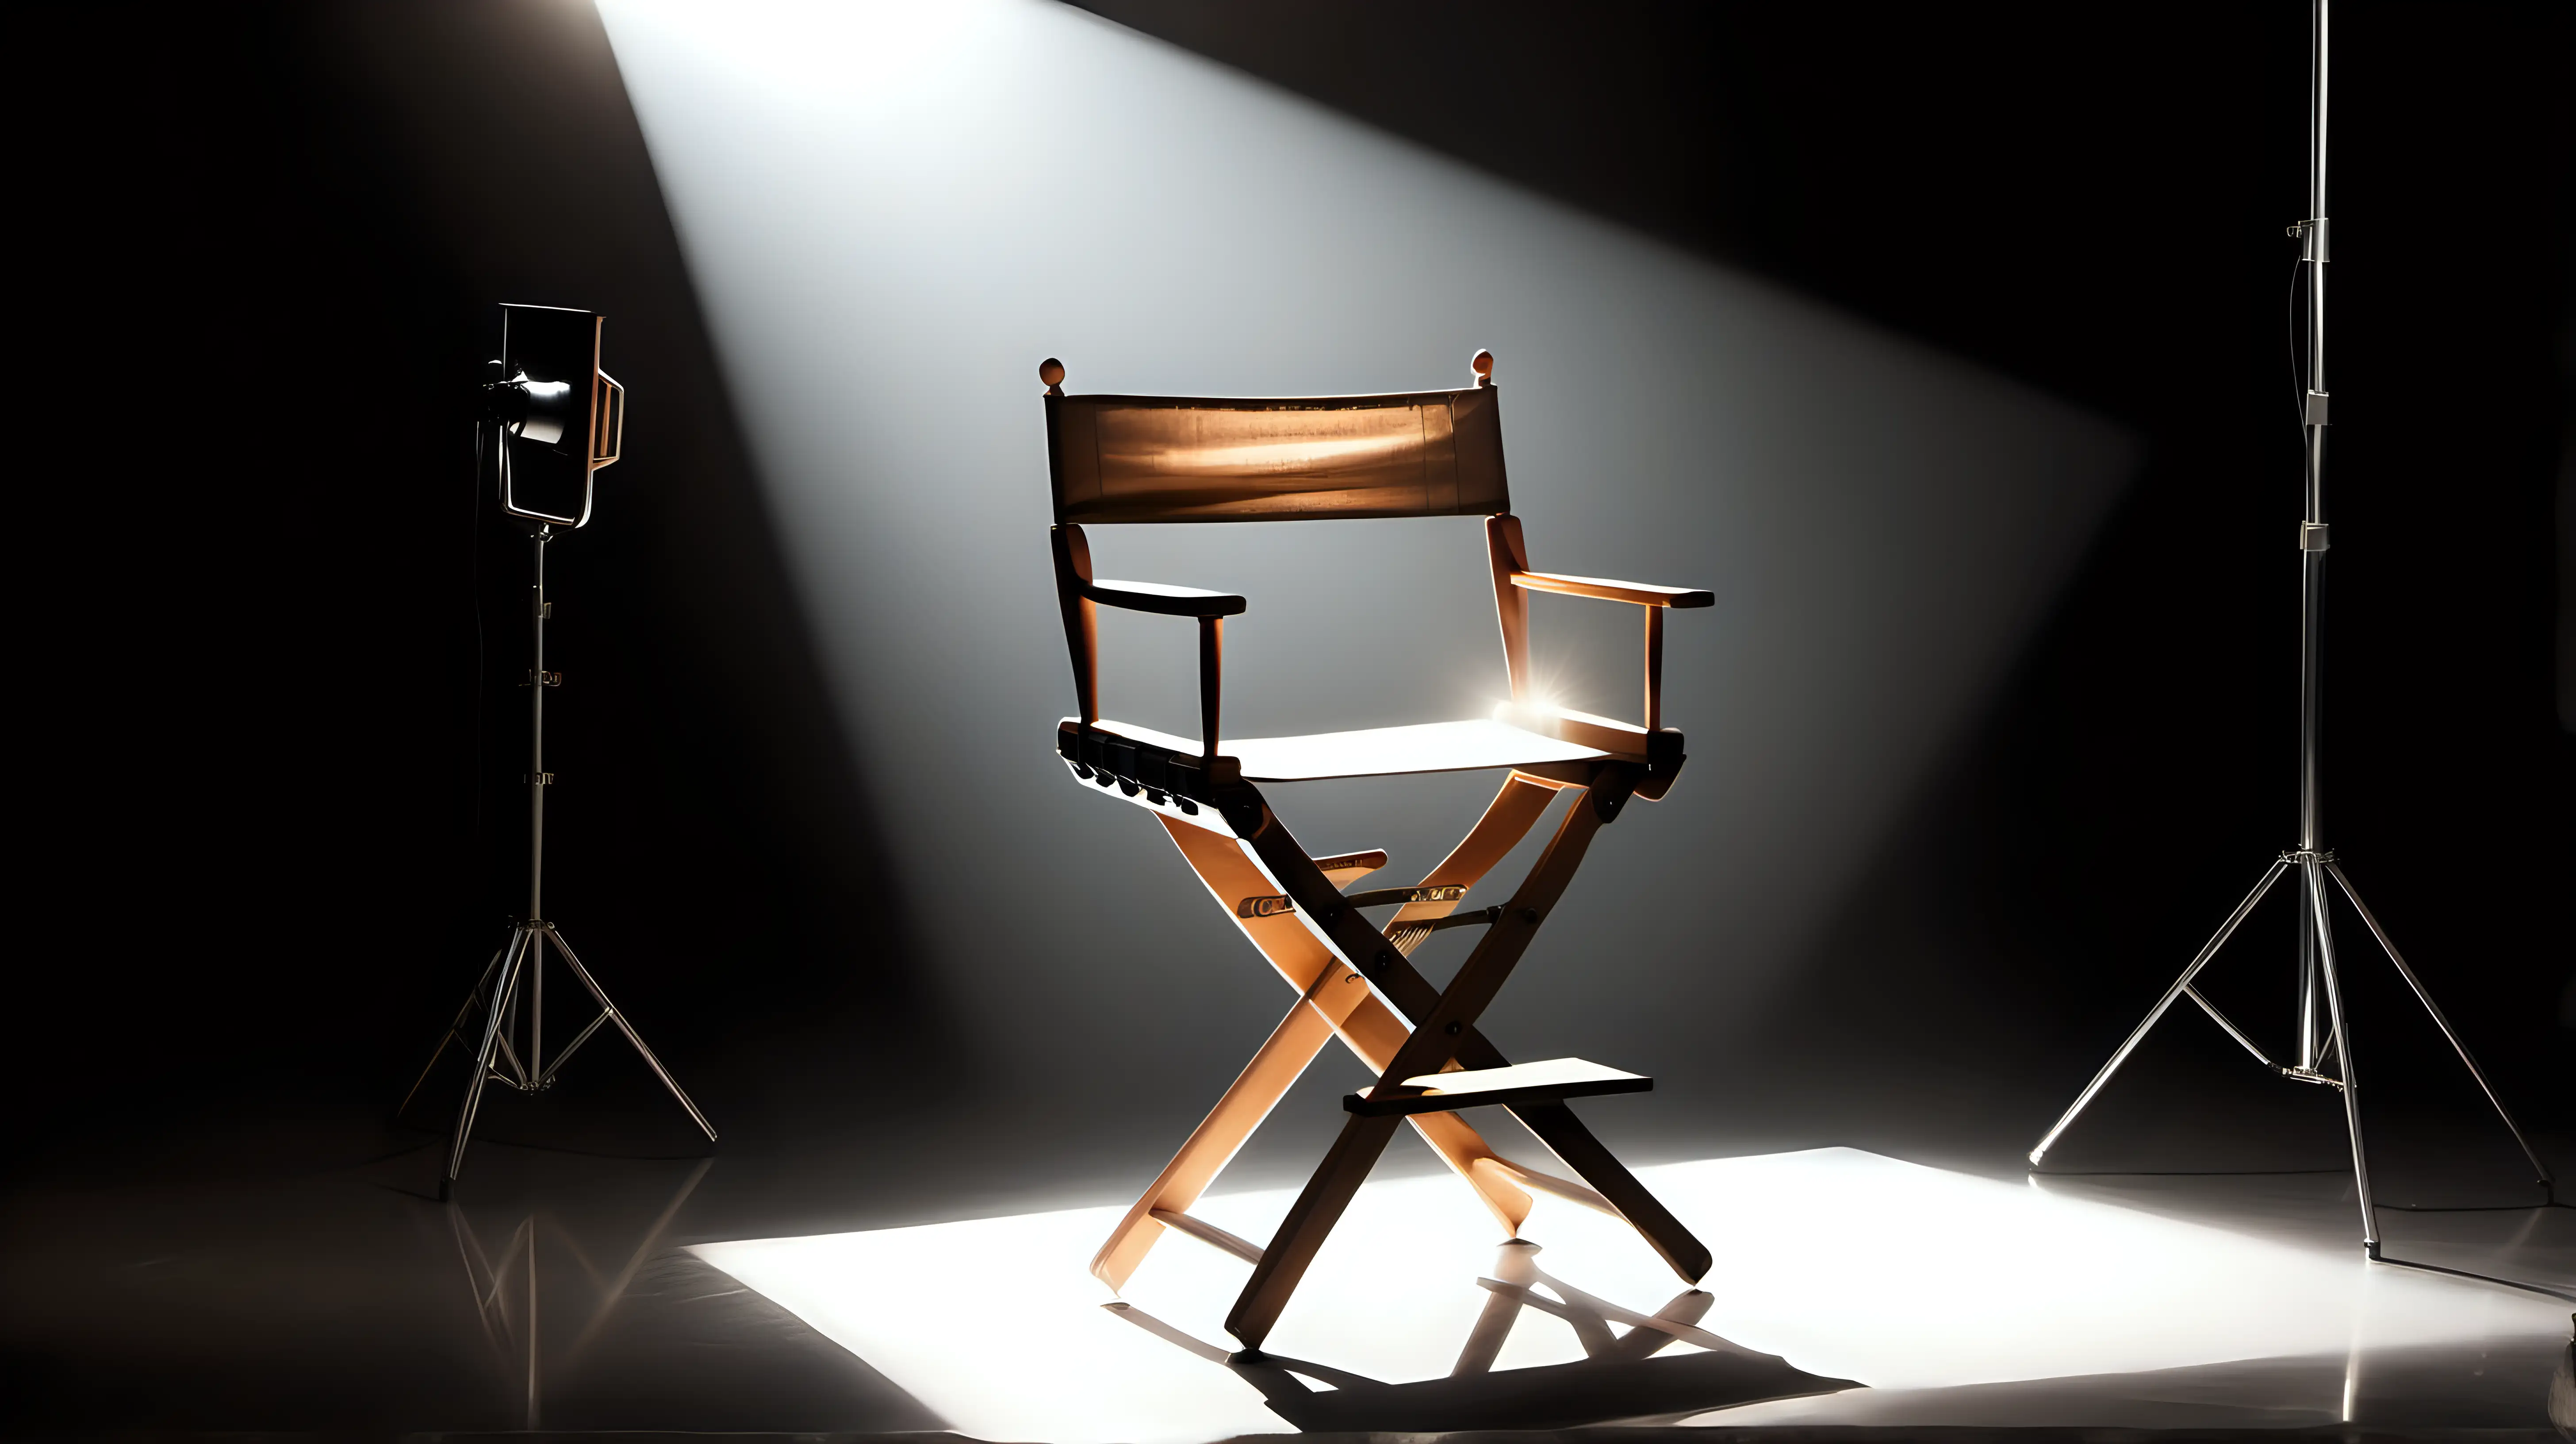 The director's chair stands in a beam of light in studio, casting call